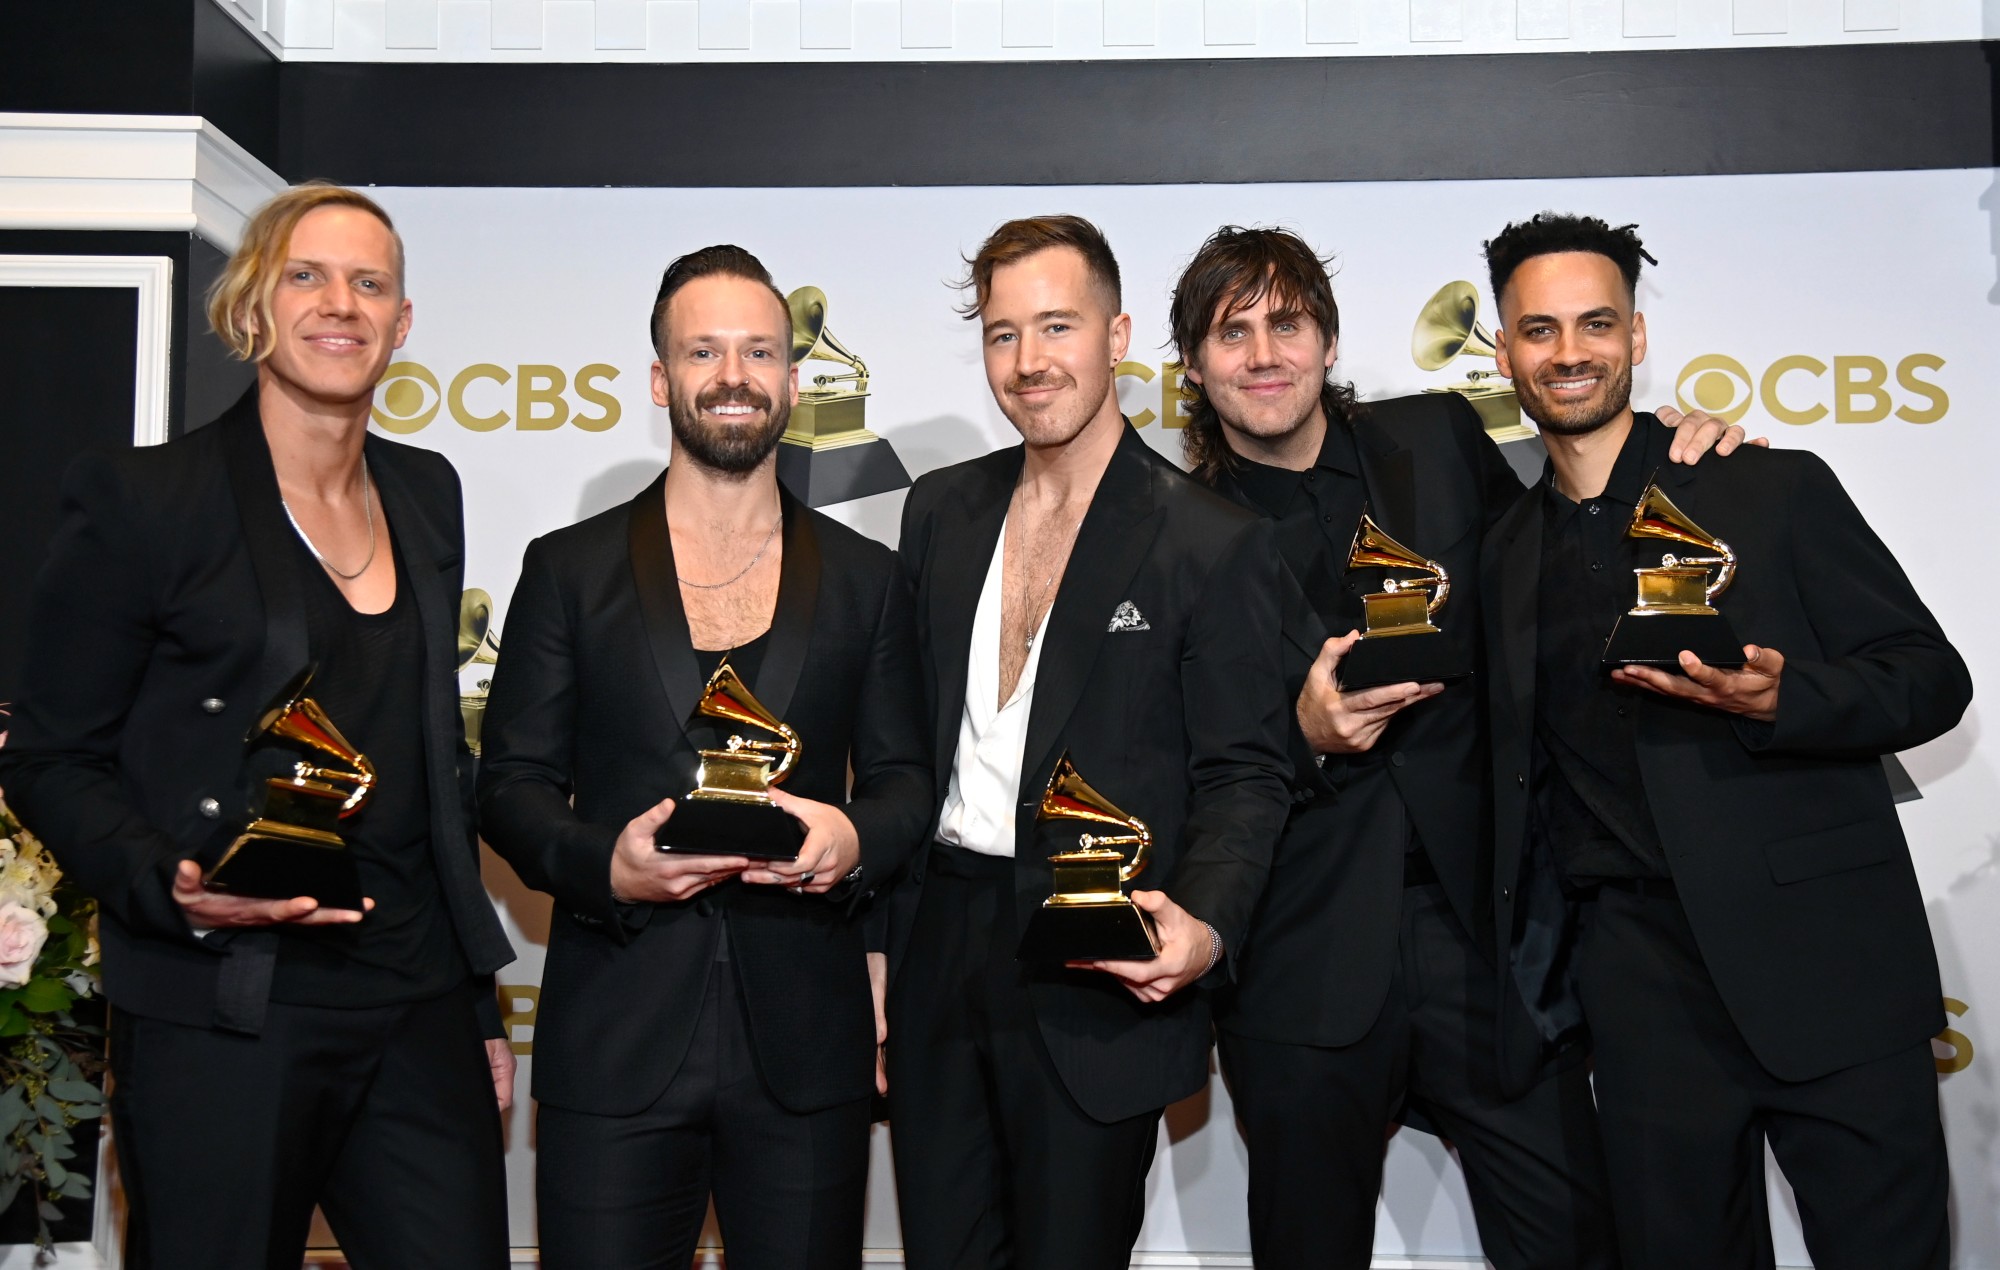 The winners of the song "Alive" with the Grammy award.